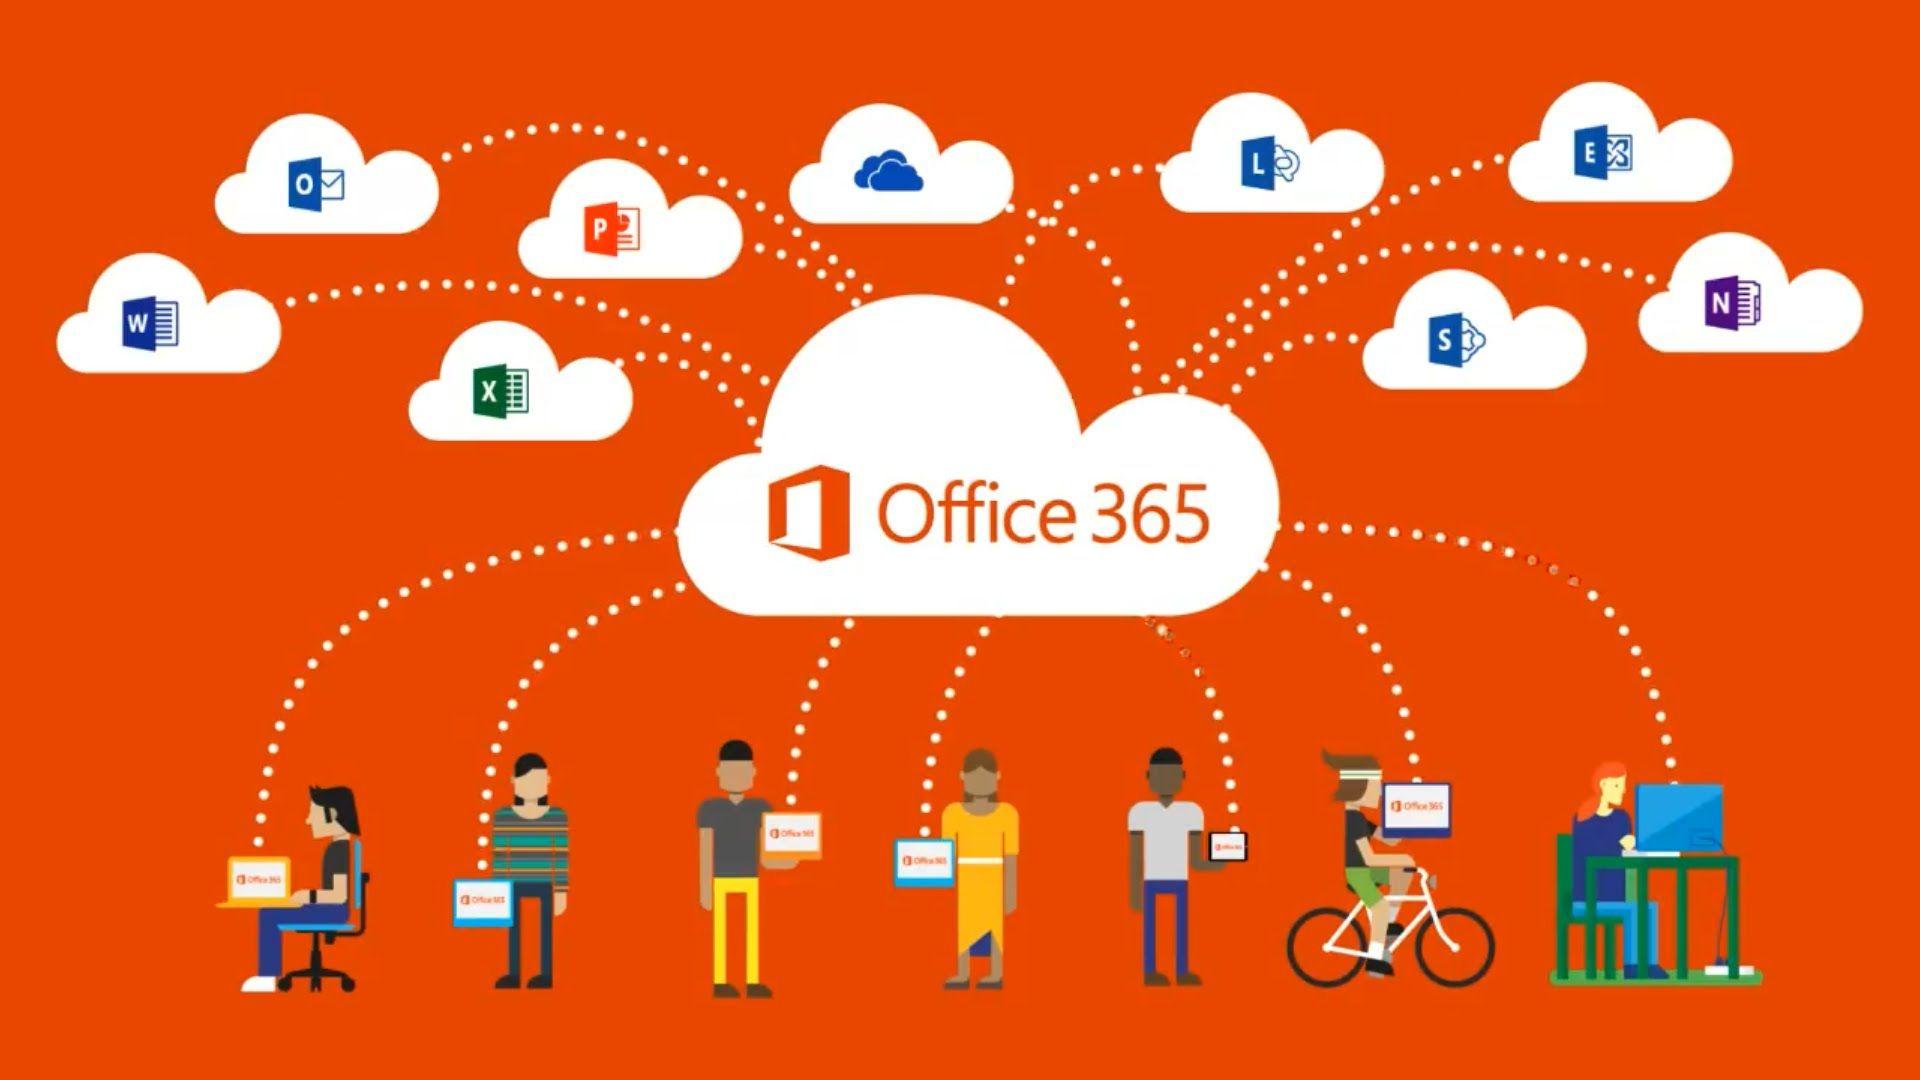 Expert tips from Office 365 users: Teams, Groups, OneNote, Outlook